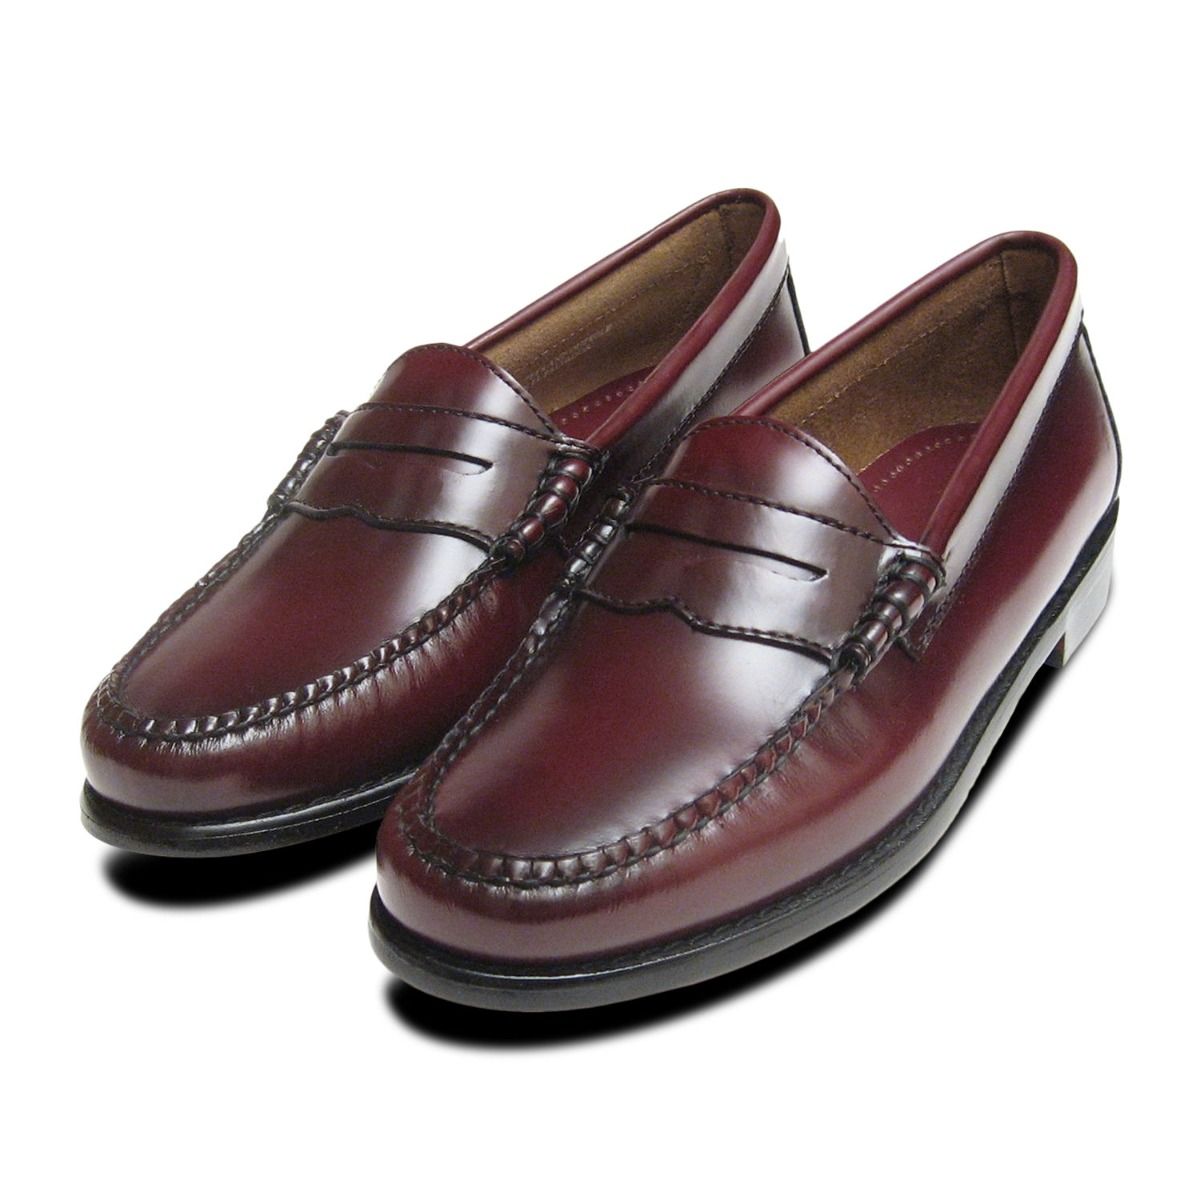 Ladies Burgundy Leather Twin Gusset Court Shoe Sizes 3-8 includes half sizes 